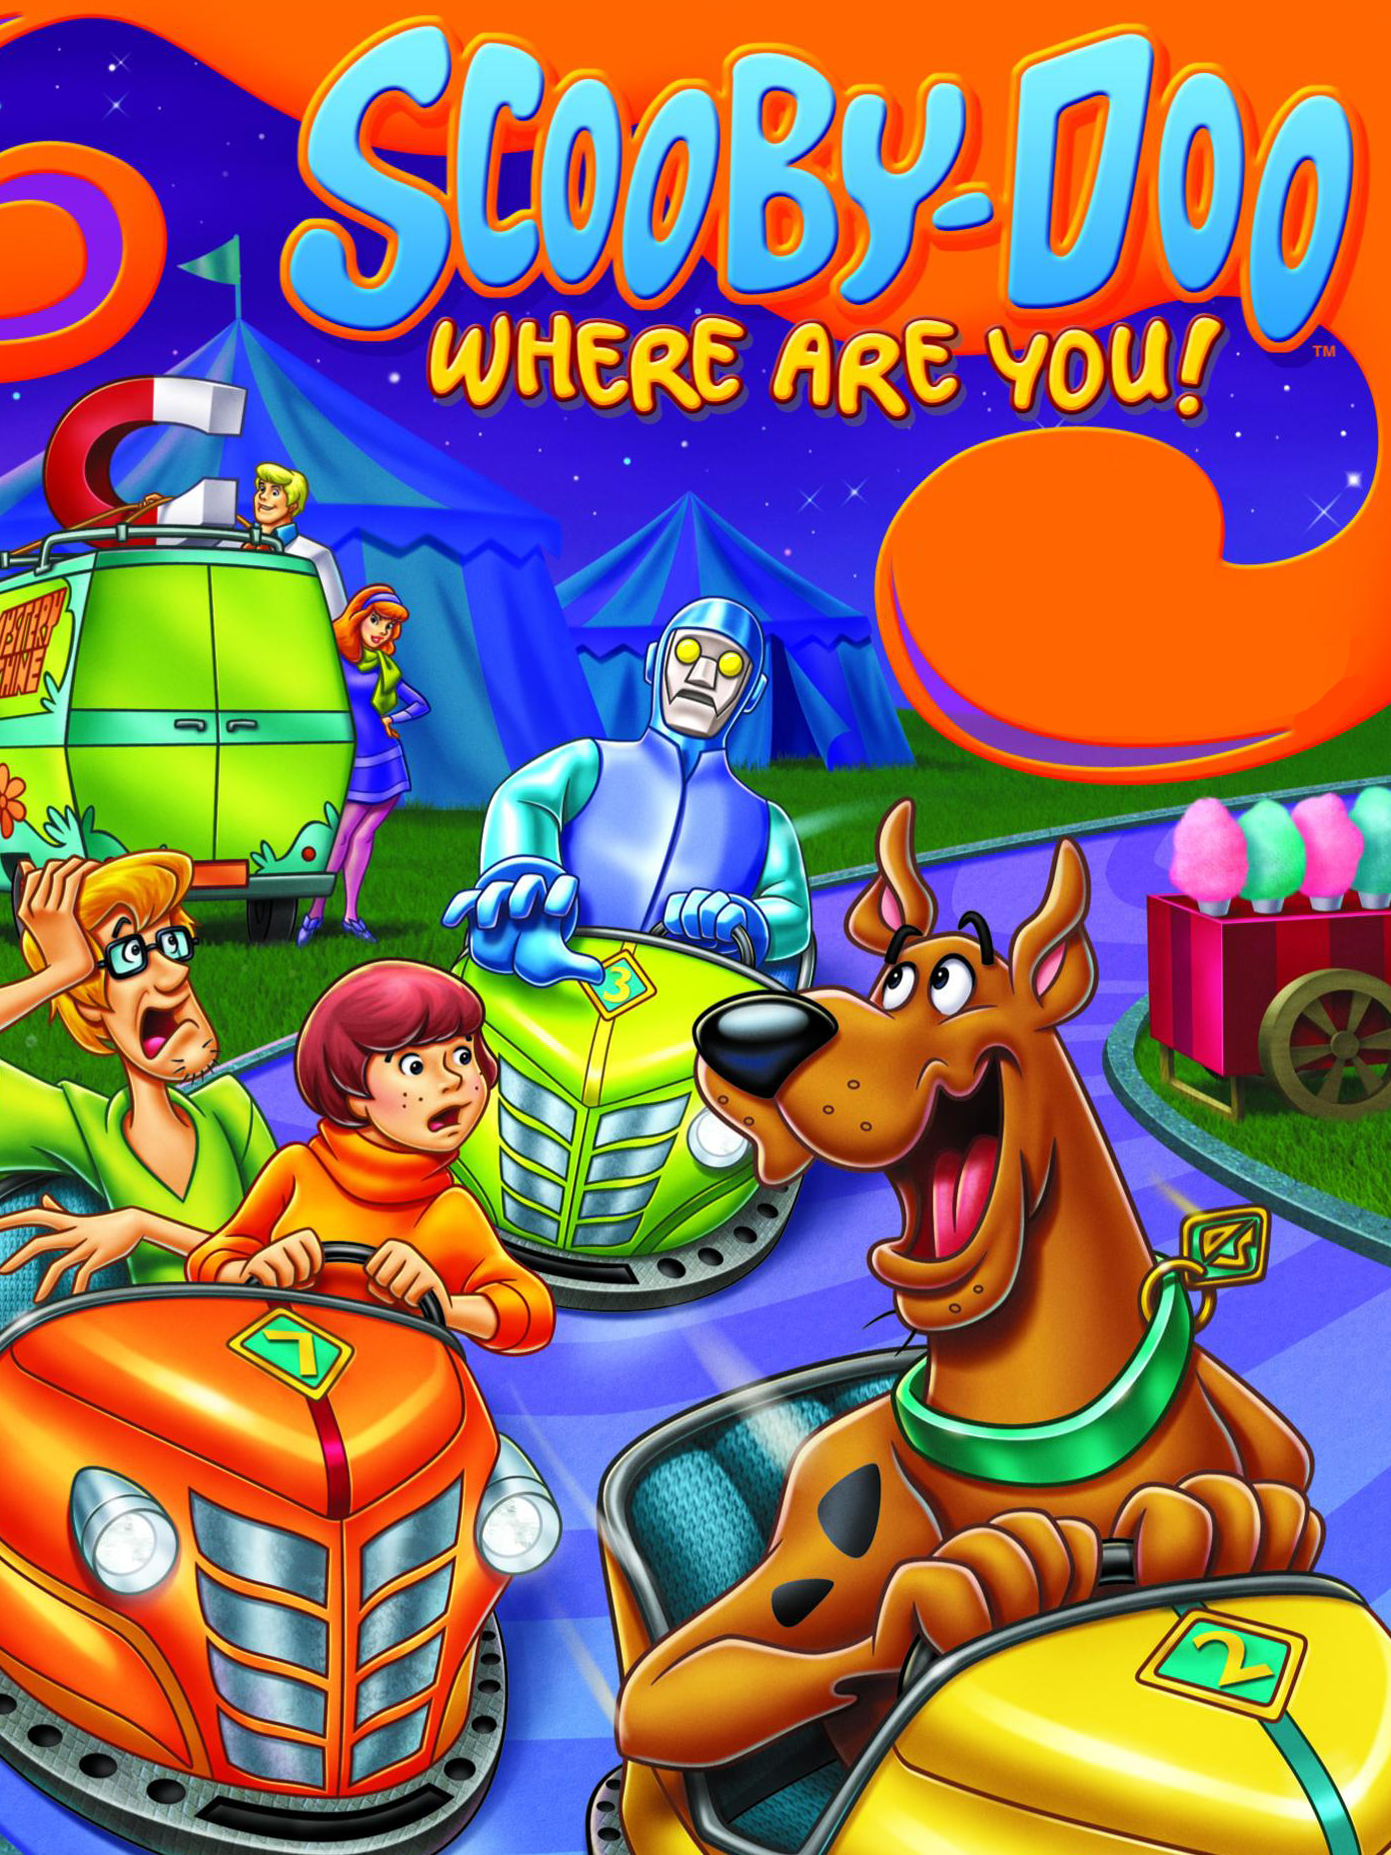 Scooby doo where are you watch